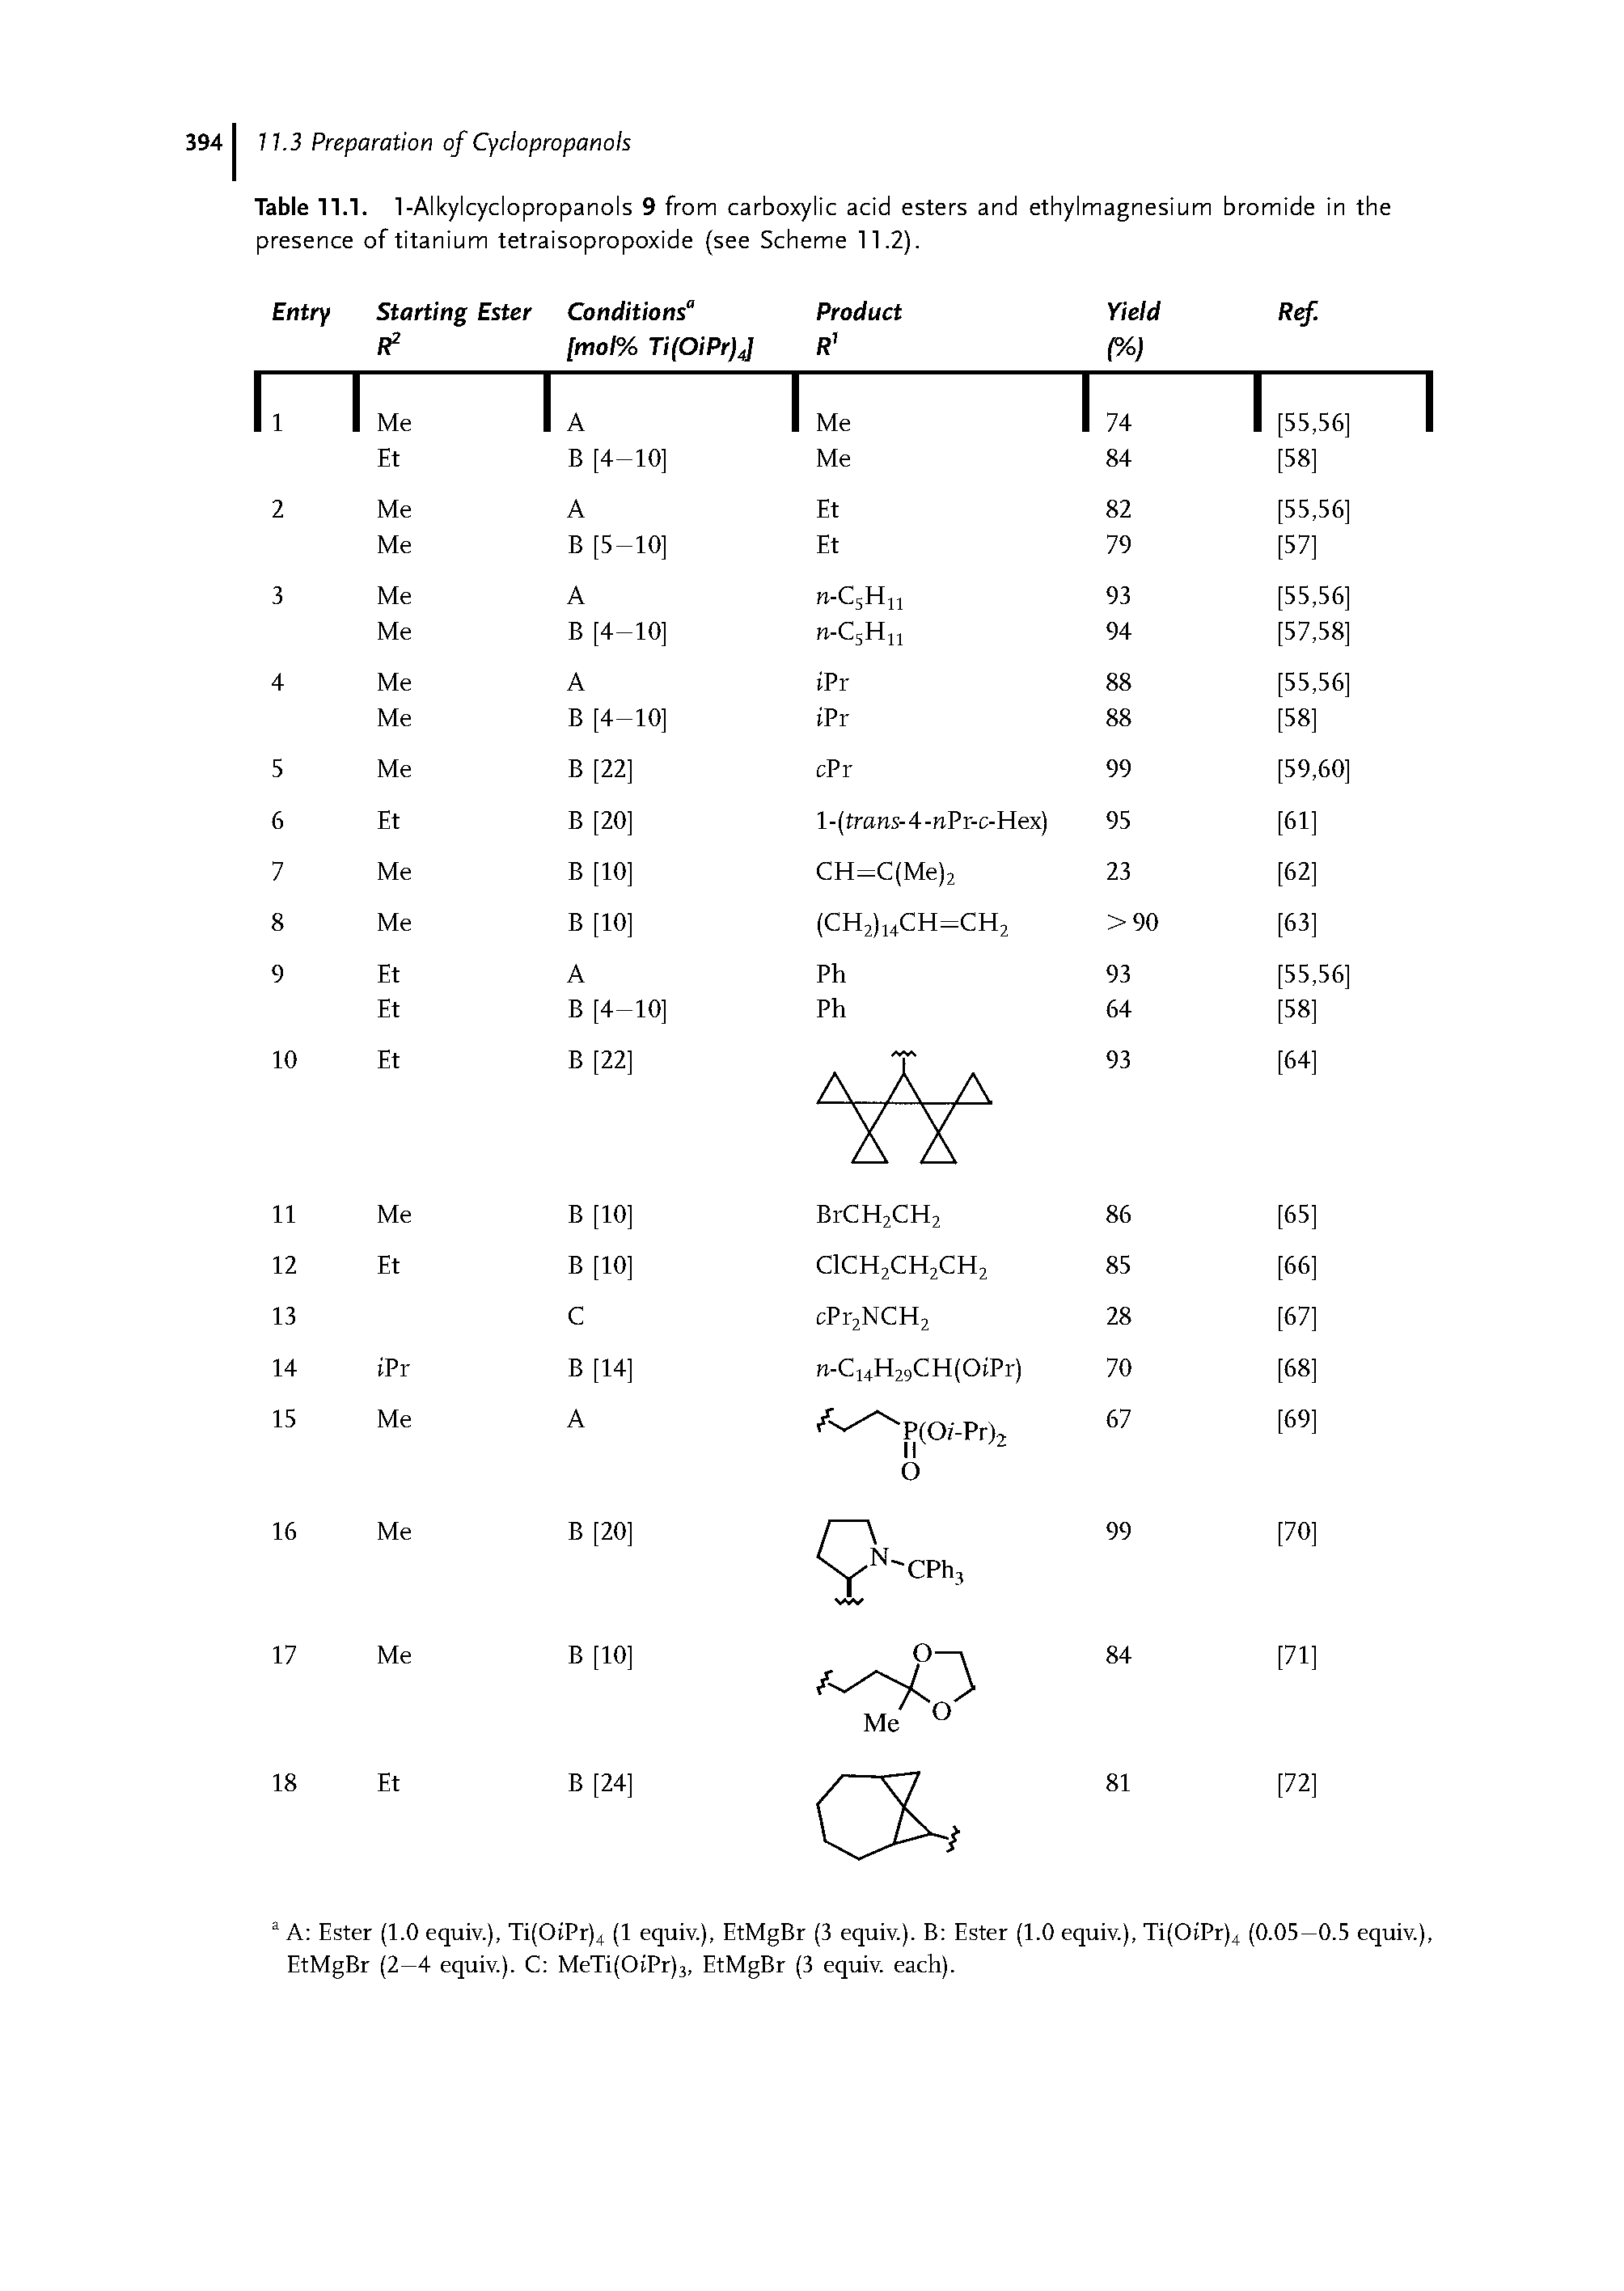 Table 11.1. 1-Alkylcyclopropanols 9 from carboxylic acid esters and ethylmagnesium bromide in the presence of titanium tetraisopropoxide (see Scheme 11.2).